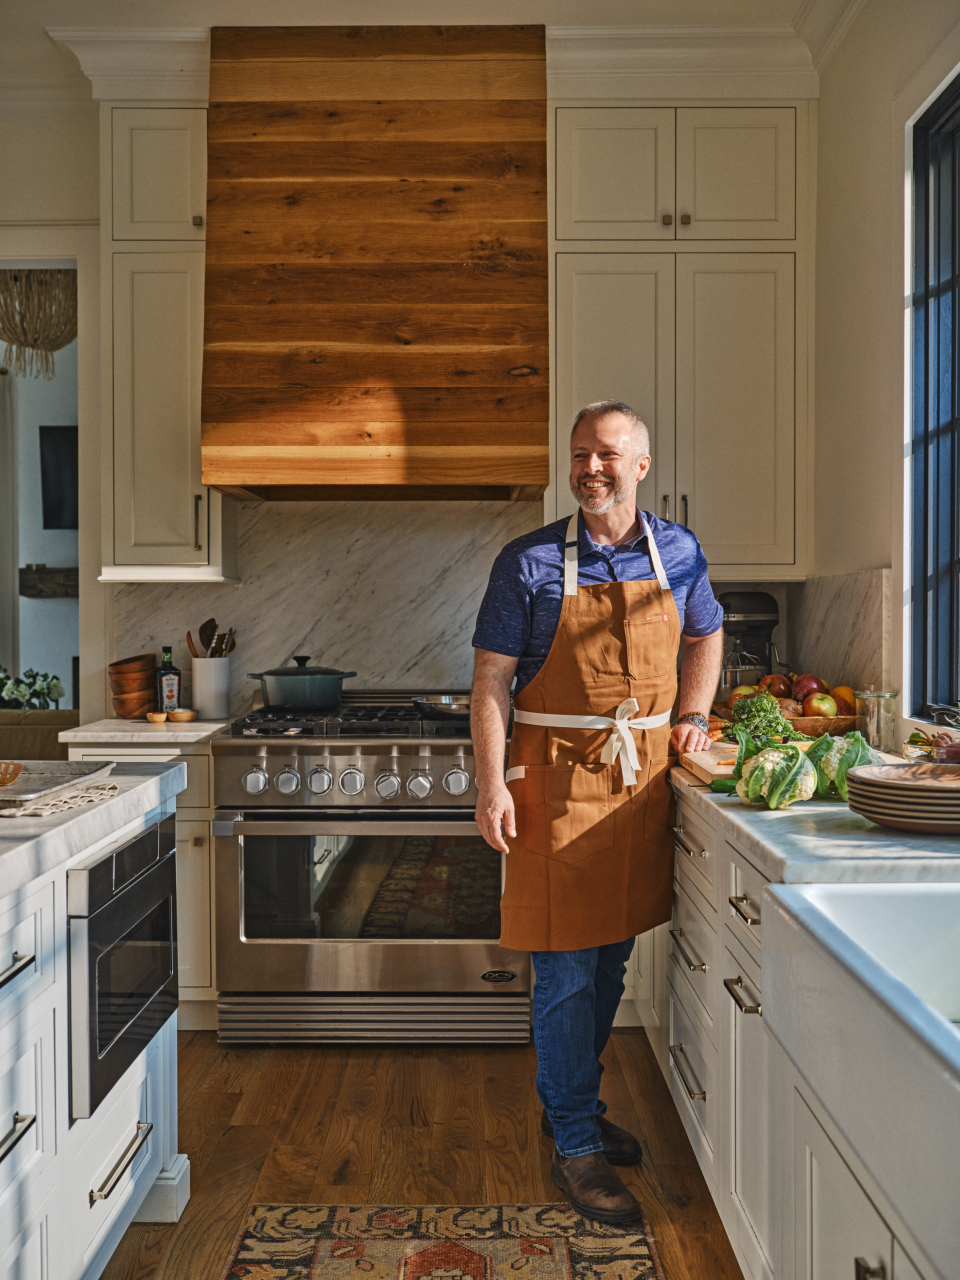 Chef William Dissen, owner of The Market Place, will release his first cookbook this April titled, "Thoughtful Cooking: Recipes Rooted in the New South."